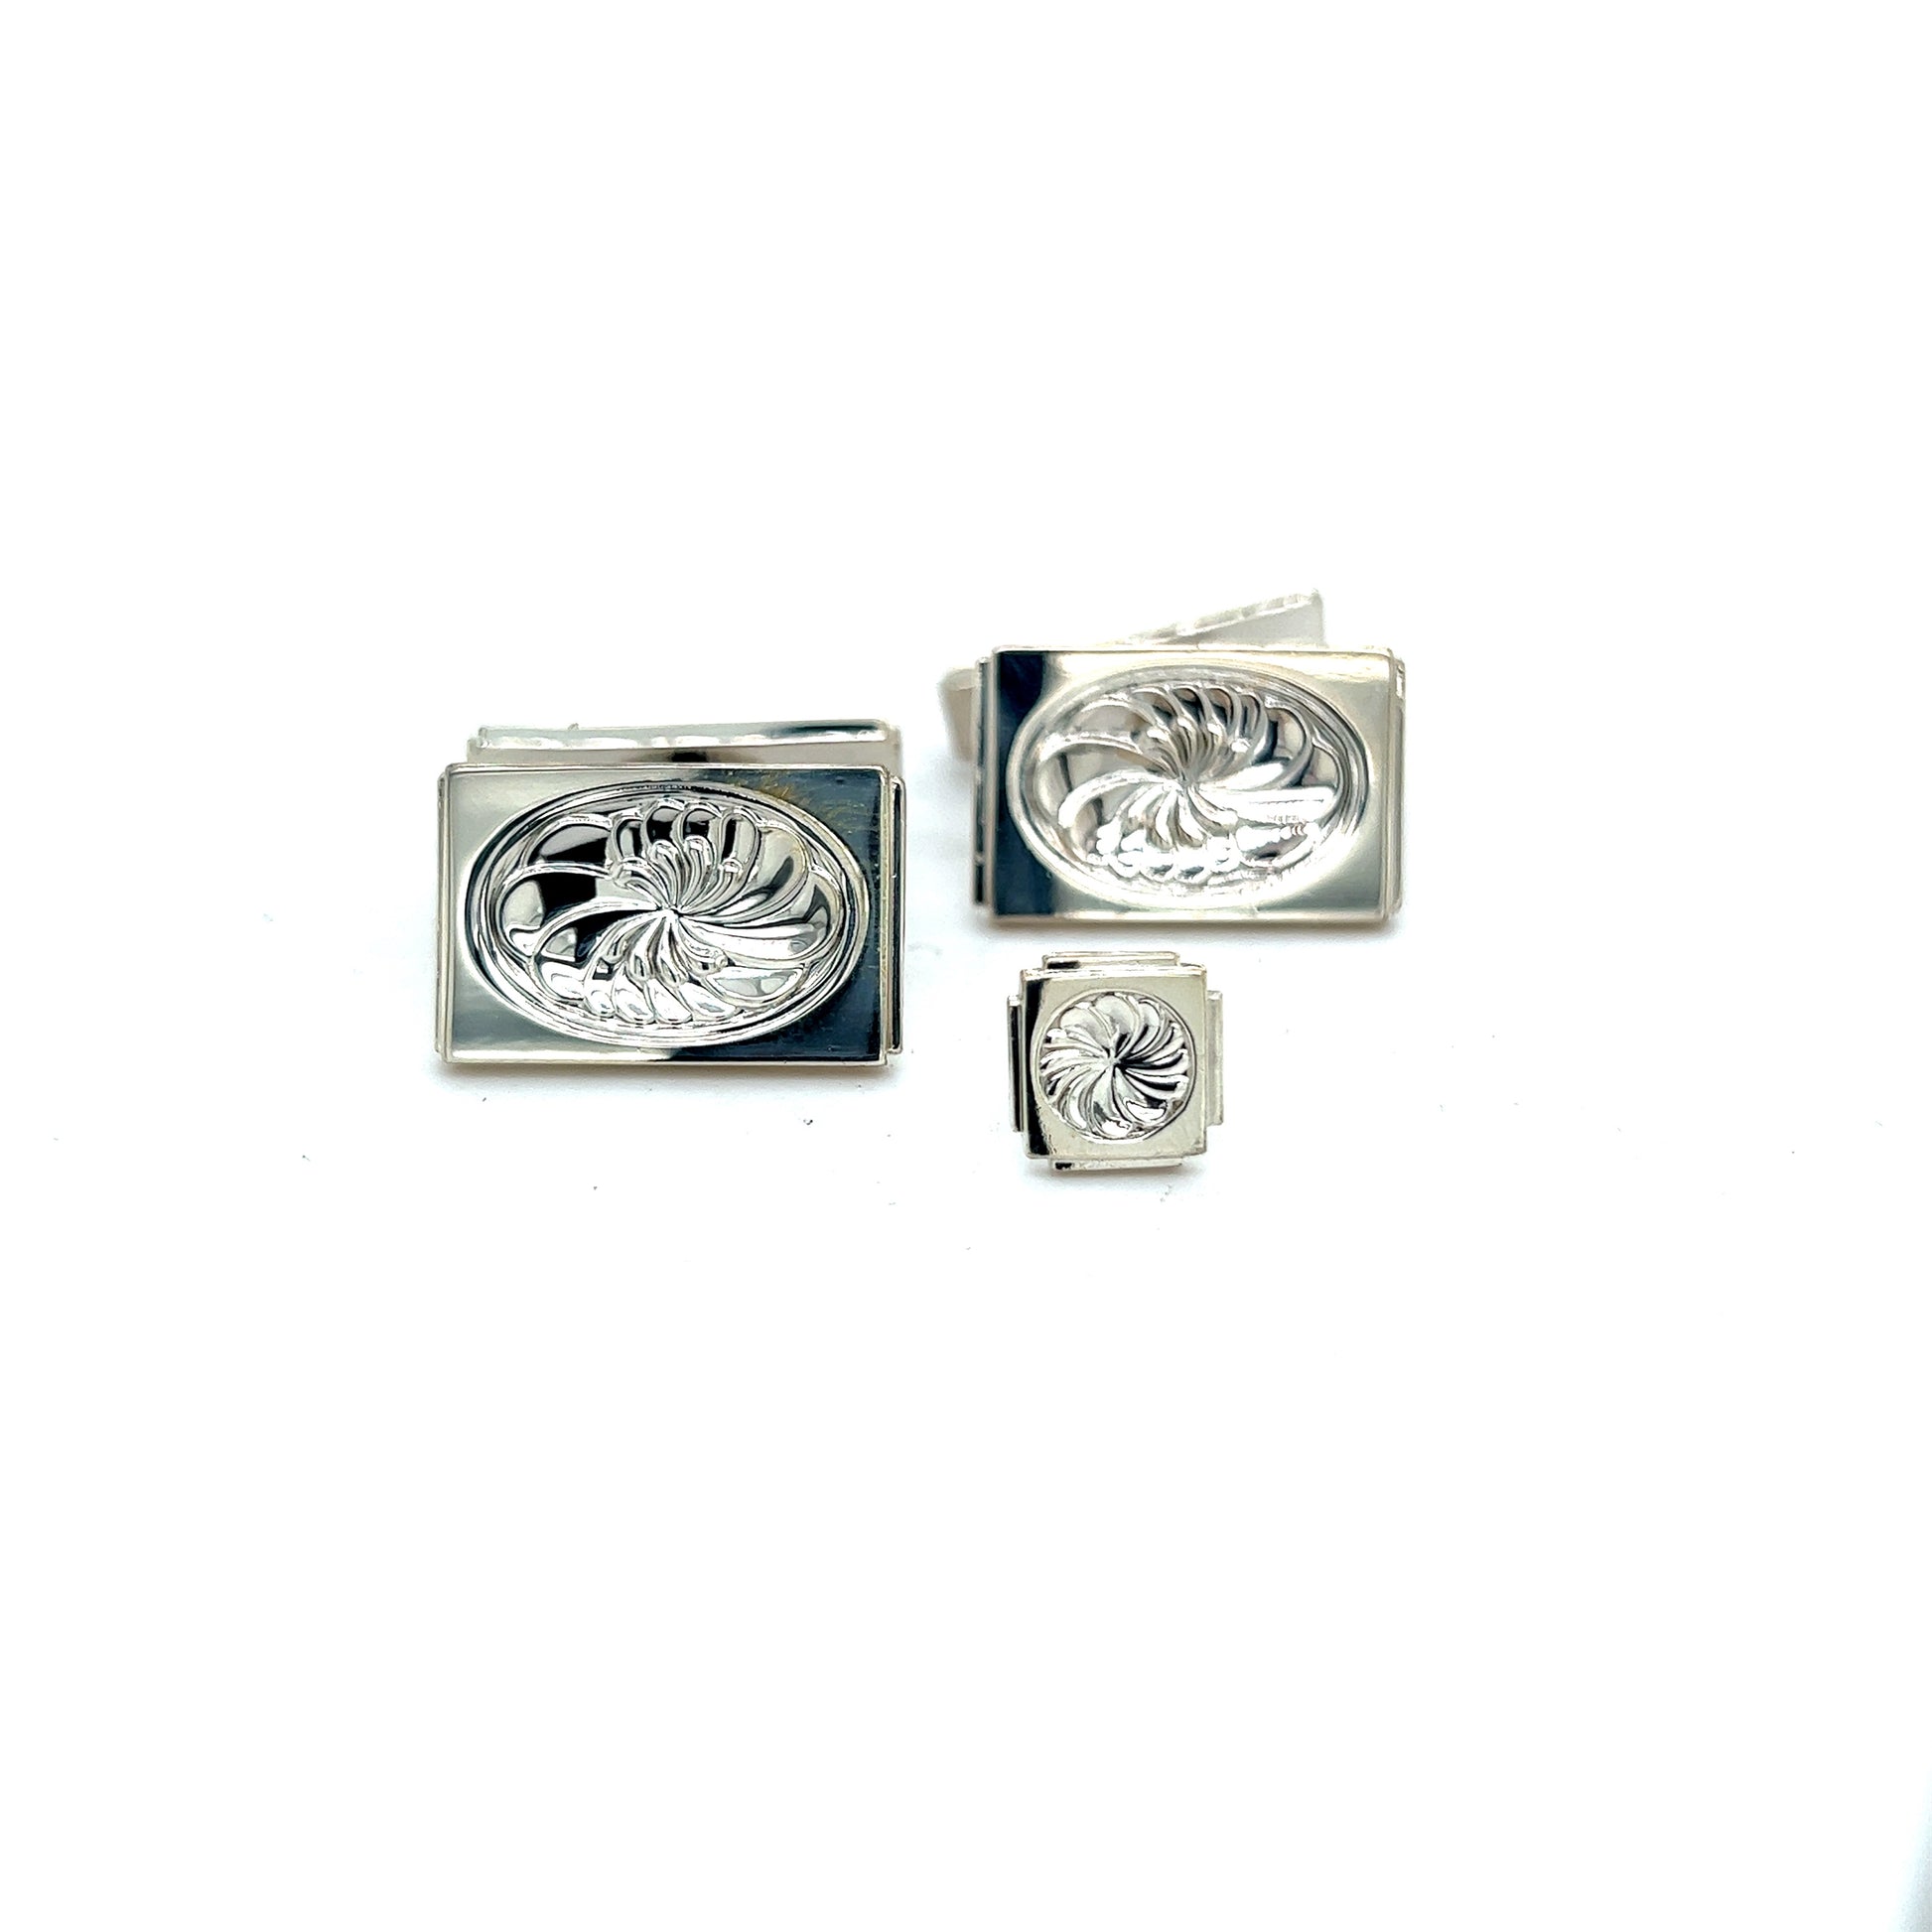 Georg Jensen Estate Mens Cufflinks Set With Tie Pin Without Back of  Tie Pin Silver GJ11 - Certified Fine Jewelry